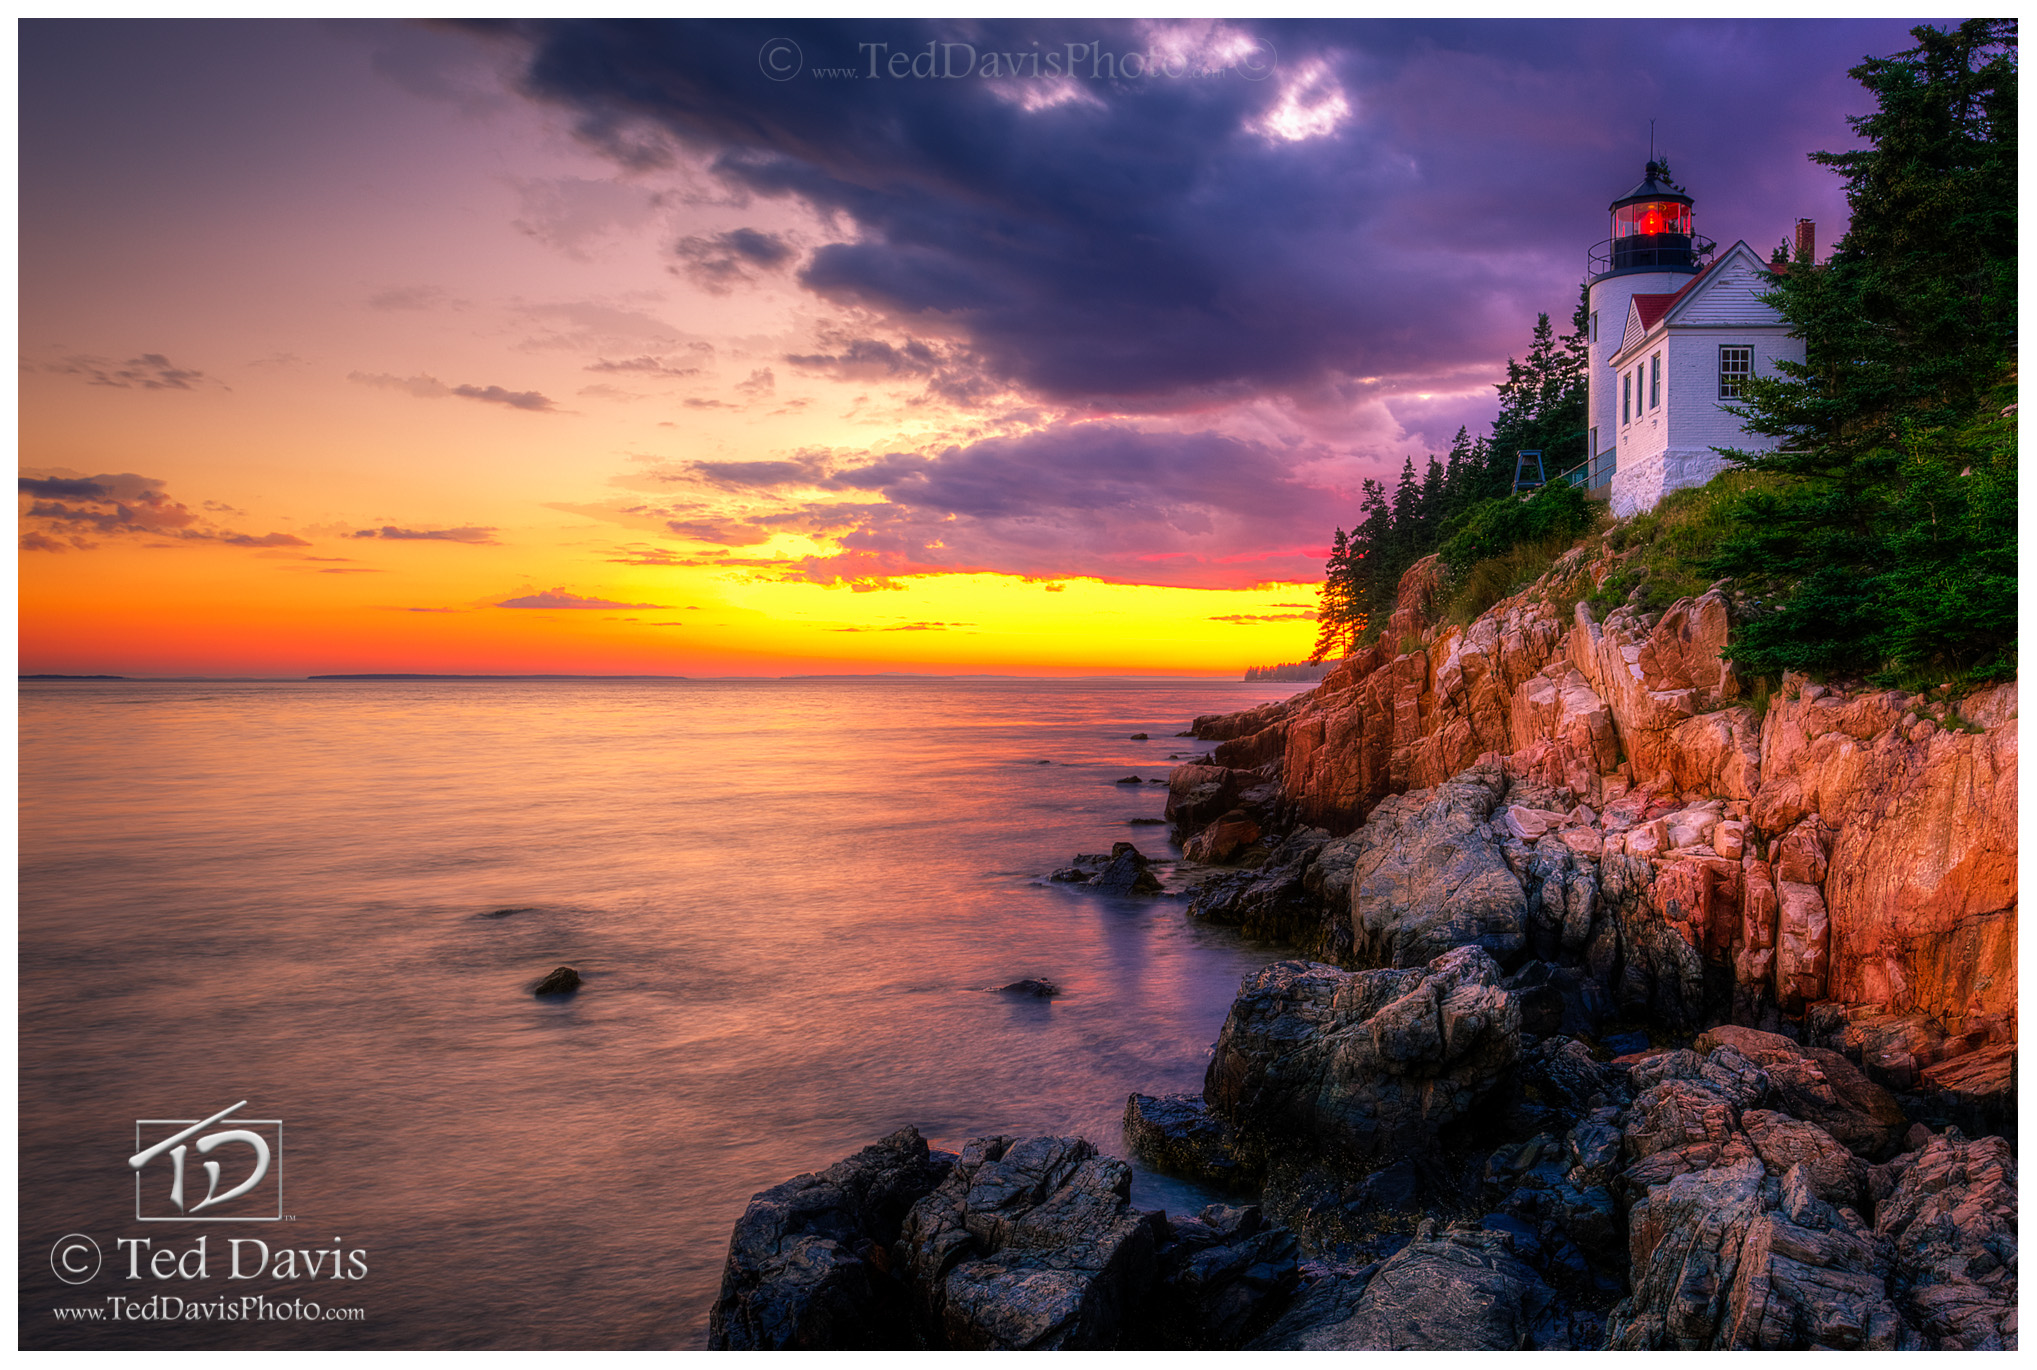 Limited Edition of 200 The sun was setting over New England on another glorious day near Bass Harbor. The lighthouse was positively...